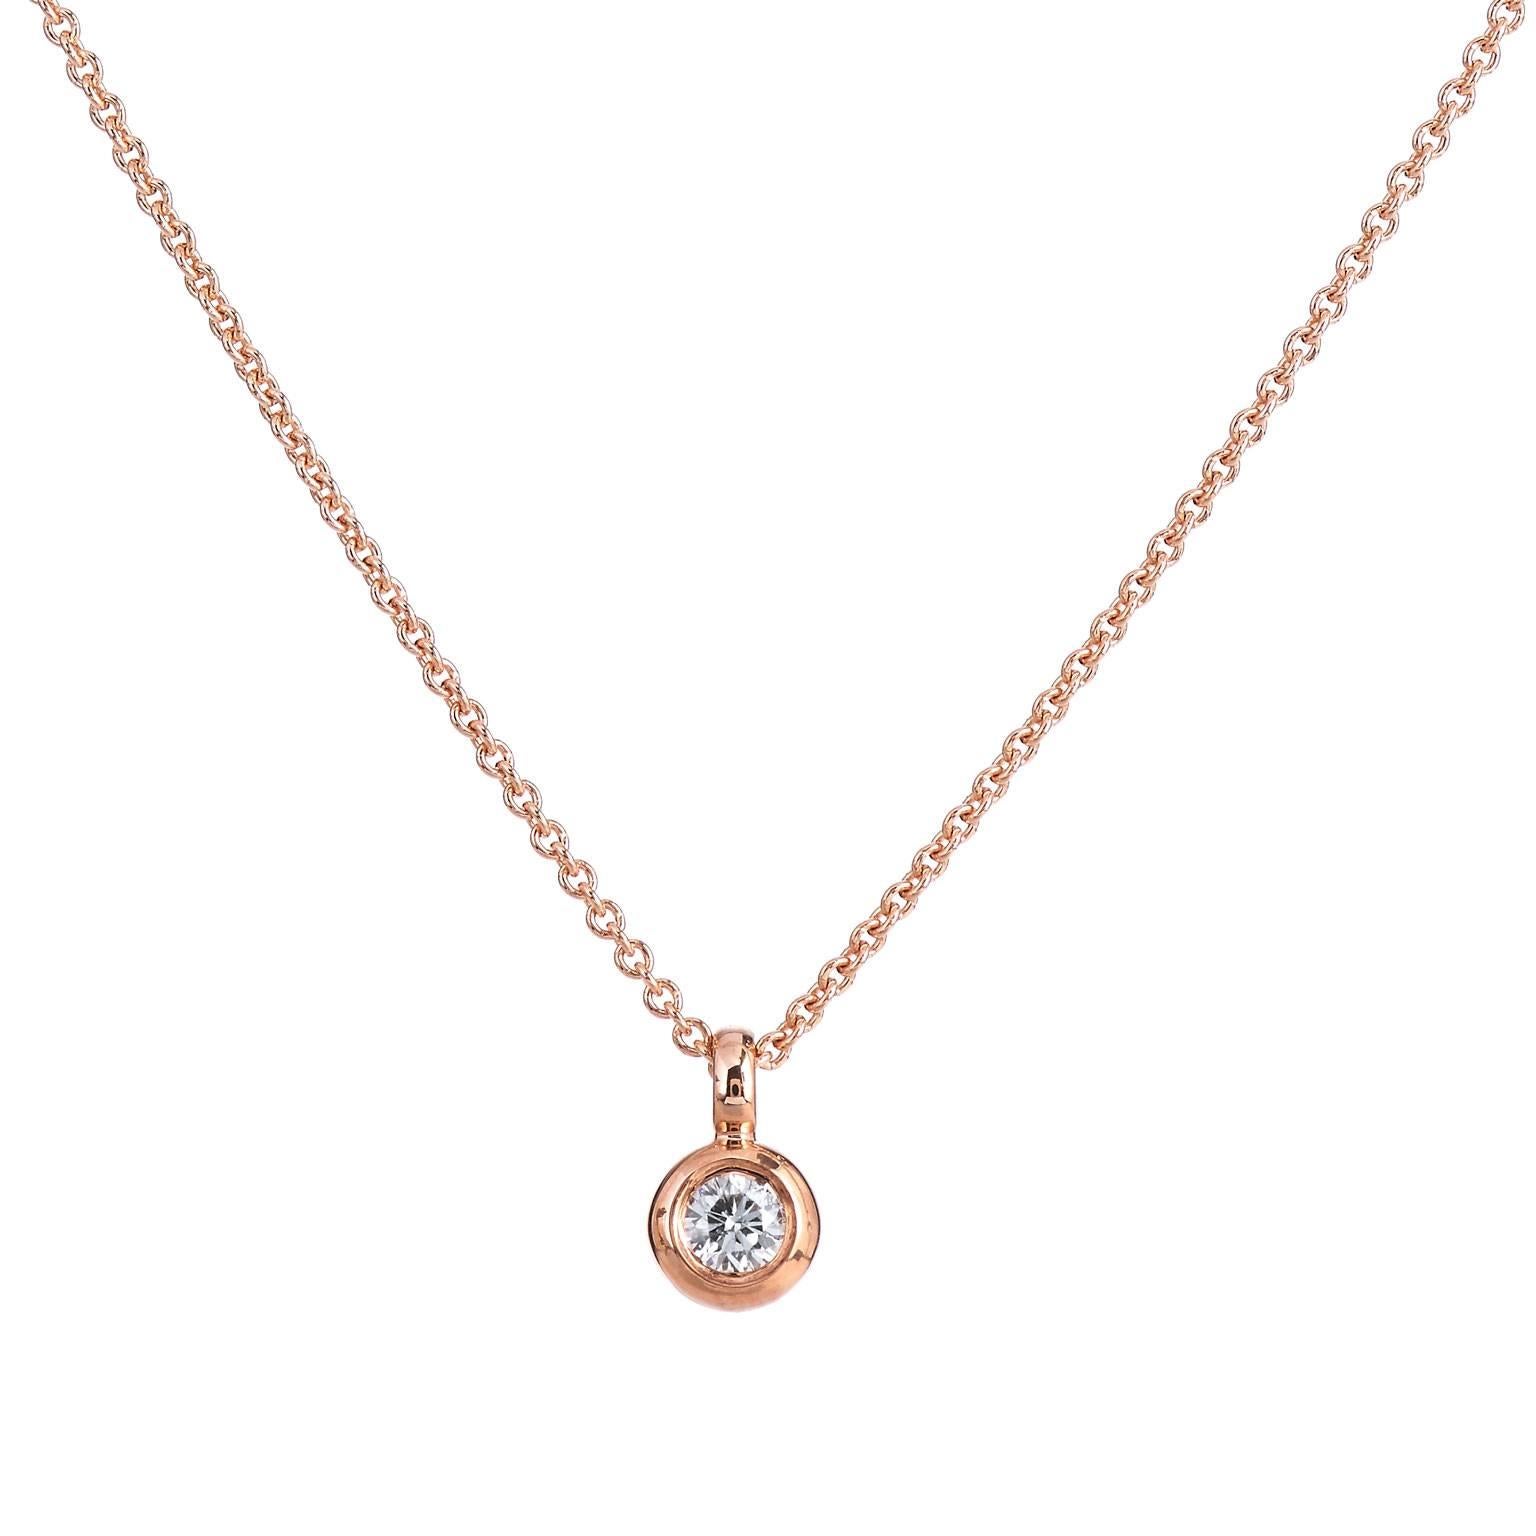 Fashioned in 14 karat rose gold, this pendant features a 0.07 carat round brilliant cut diamond set at center (E/F/SI) in bezel. Make this necklace a staple jewelry piece in your collection. Dress it up for a special occasion, layer it with multiple